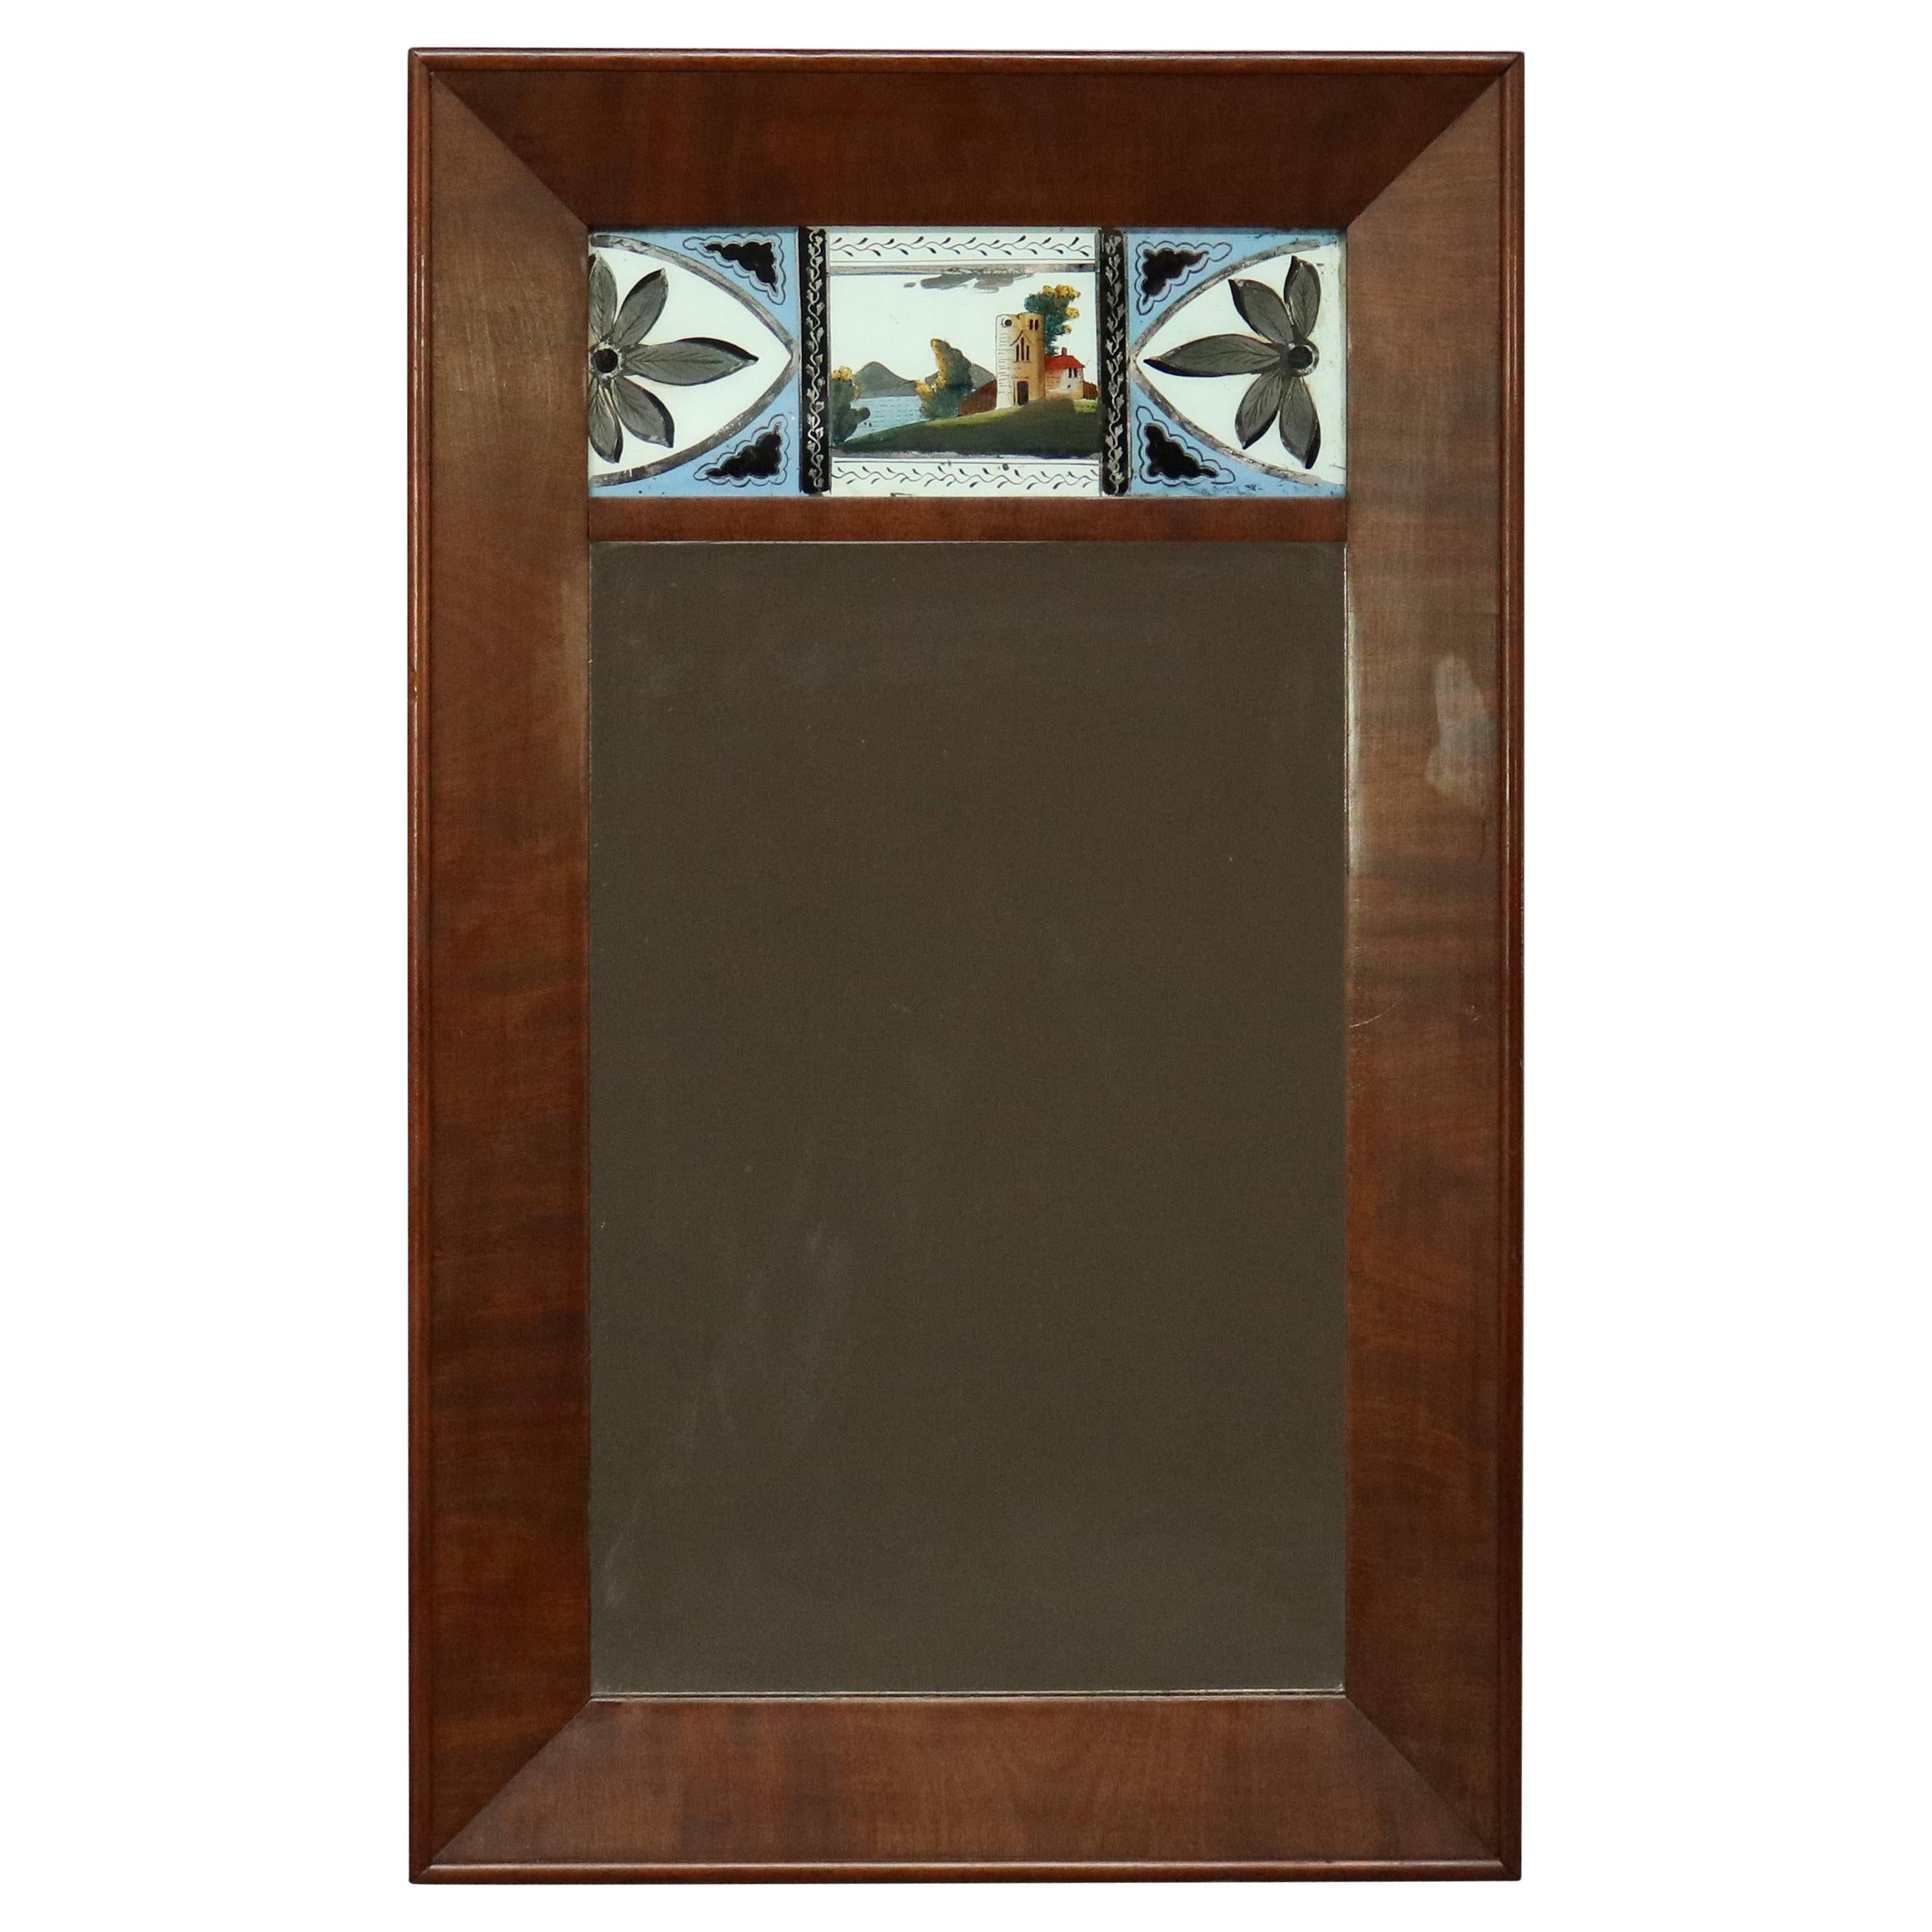 Antique American Empire Englomise Flame Mahogany Trumeau Wall Mirror, c1840 For Sale